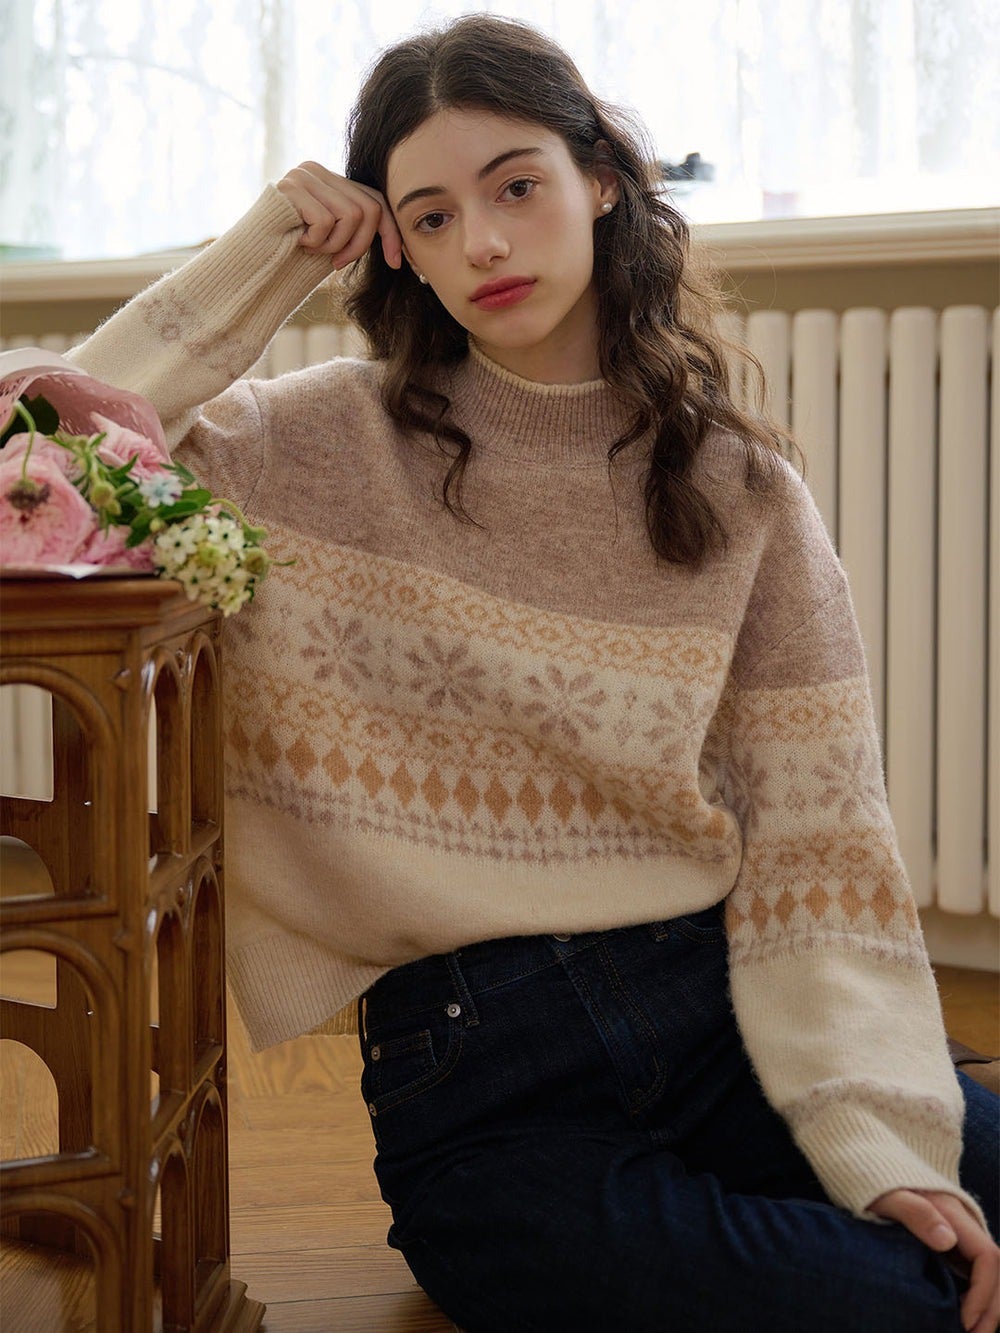 25 Sweaters To Fulfill Your Cozy Knitwear Dreams